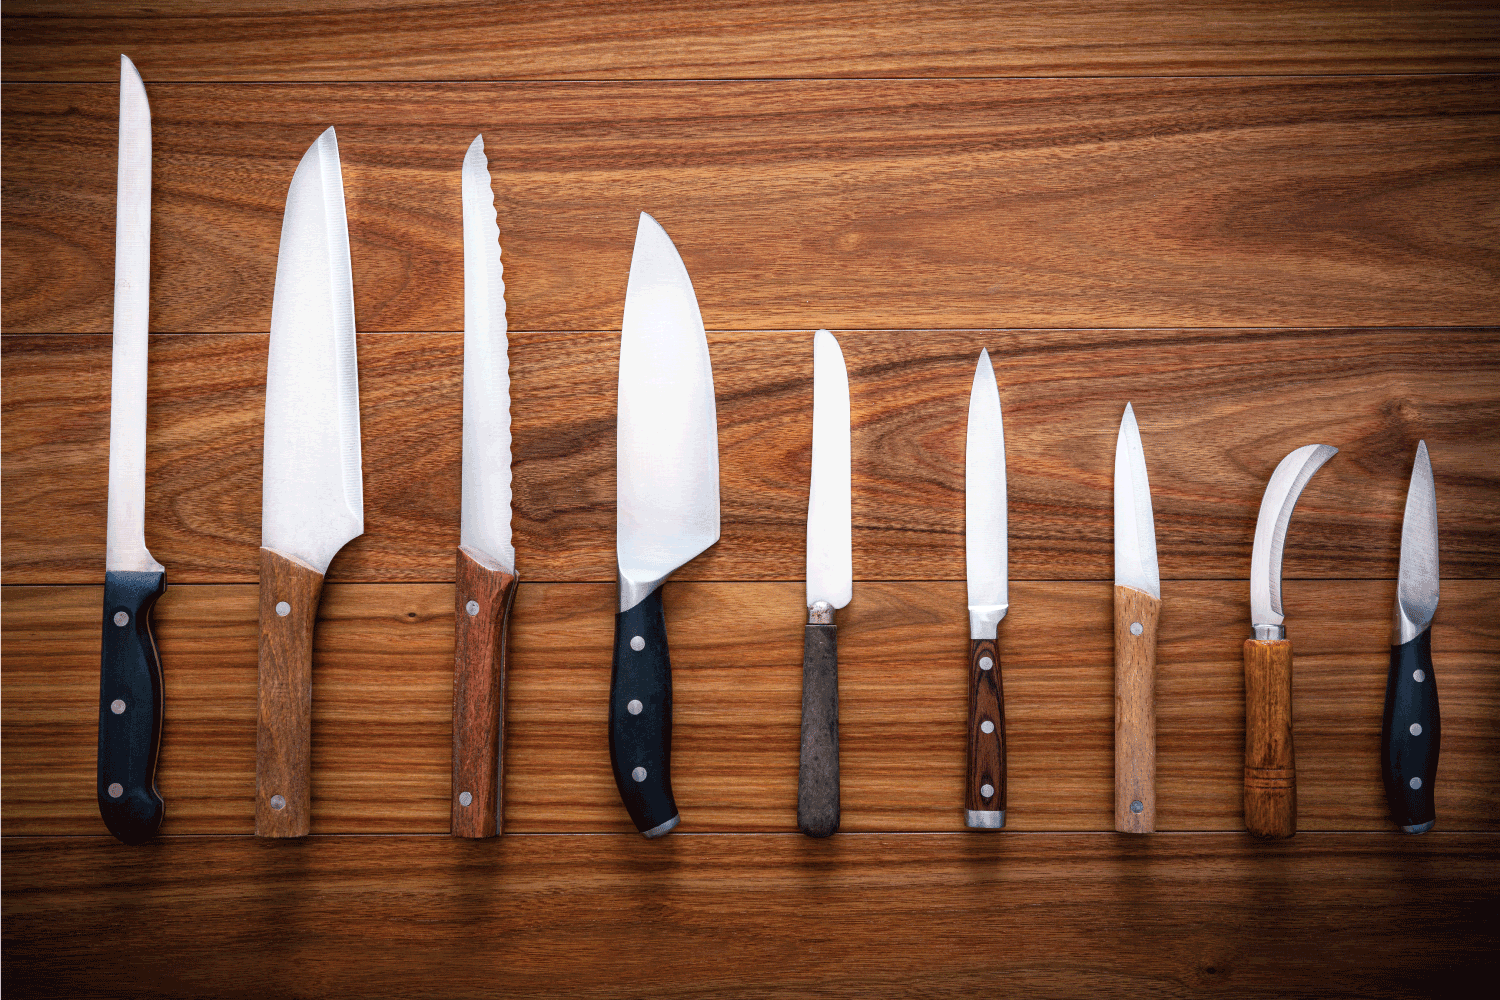 Kitchen knifes inventory on wooden background in a row arrangement